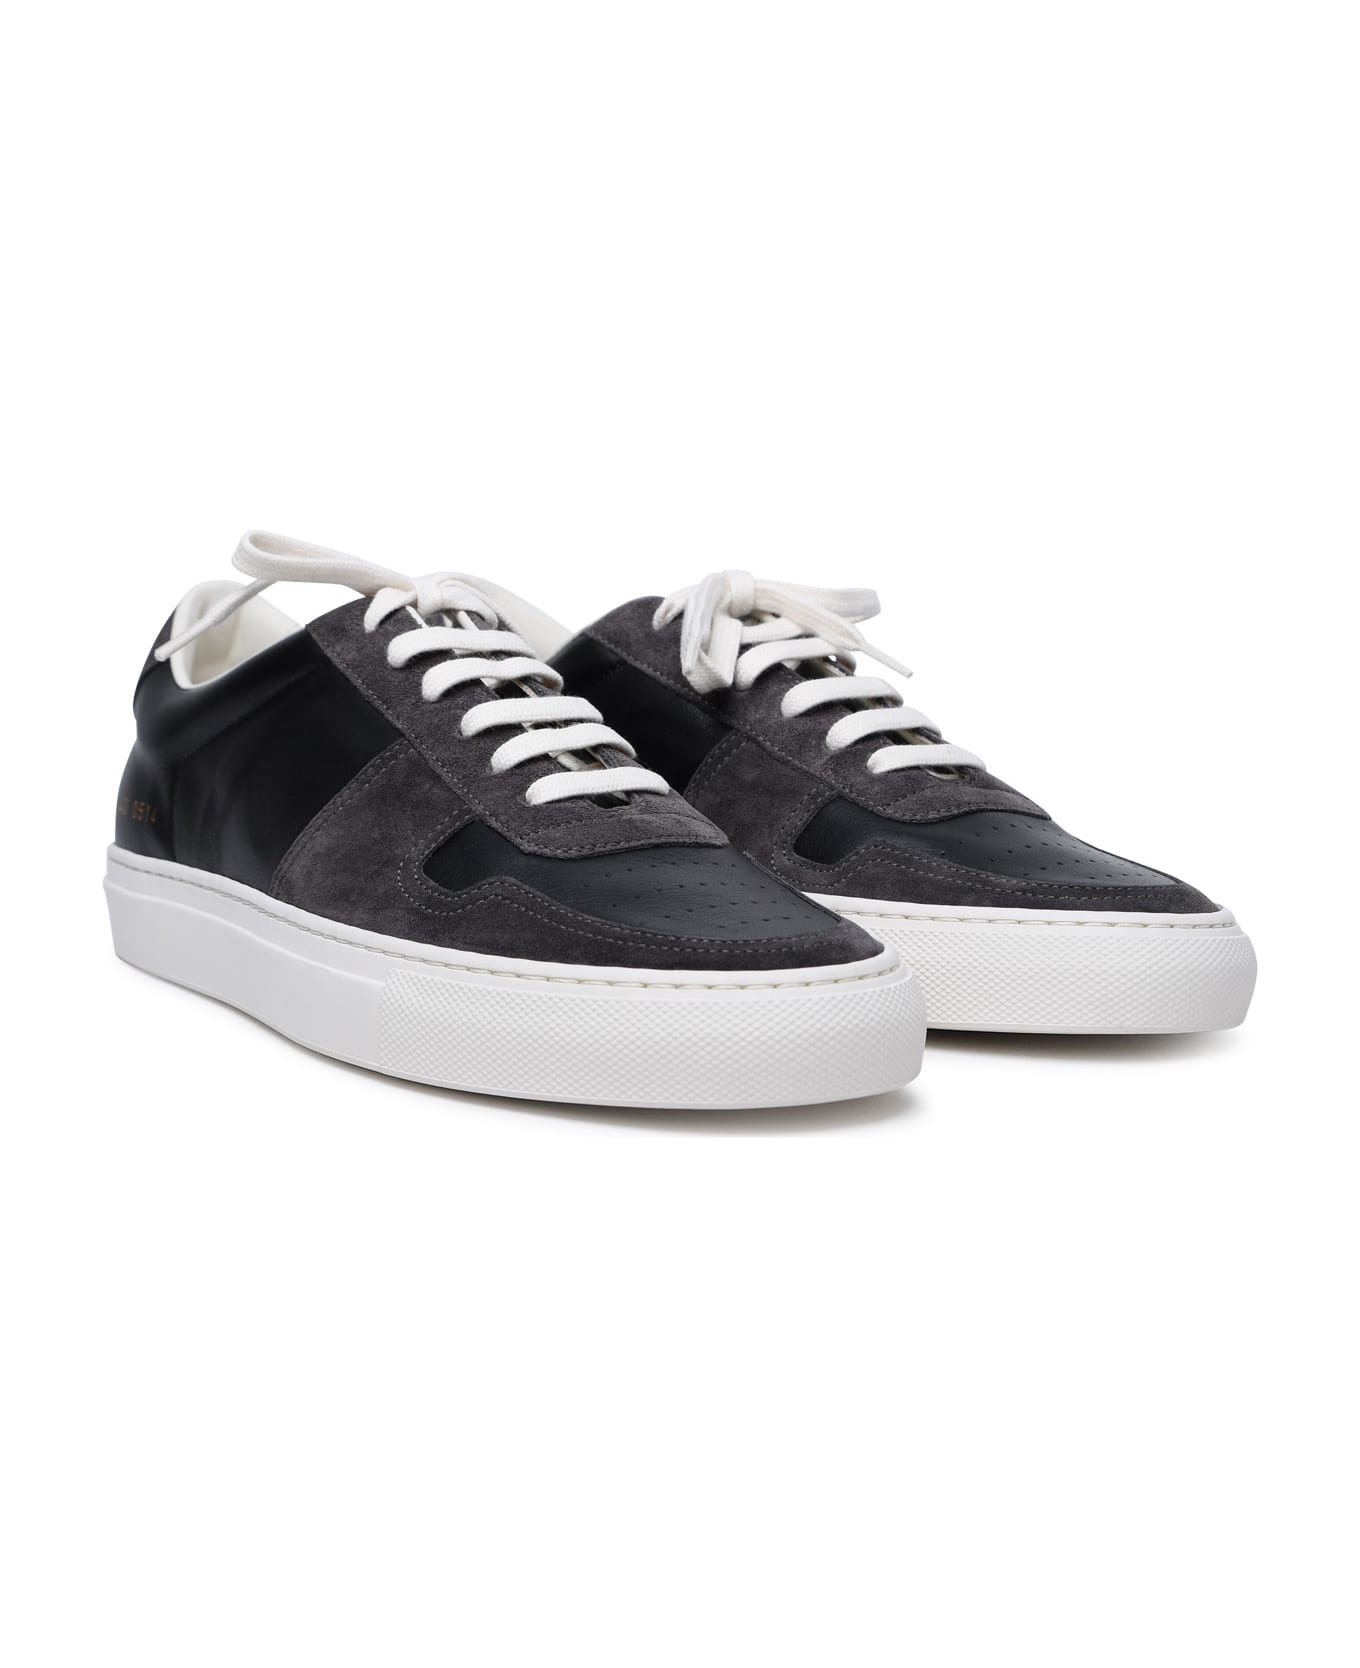 Common Projects Bball Duo Sneakers - Black